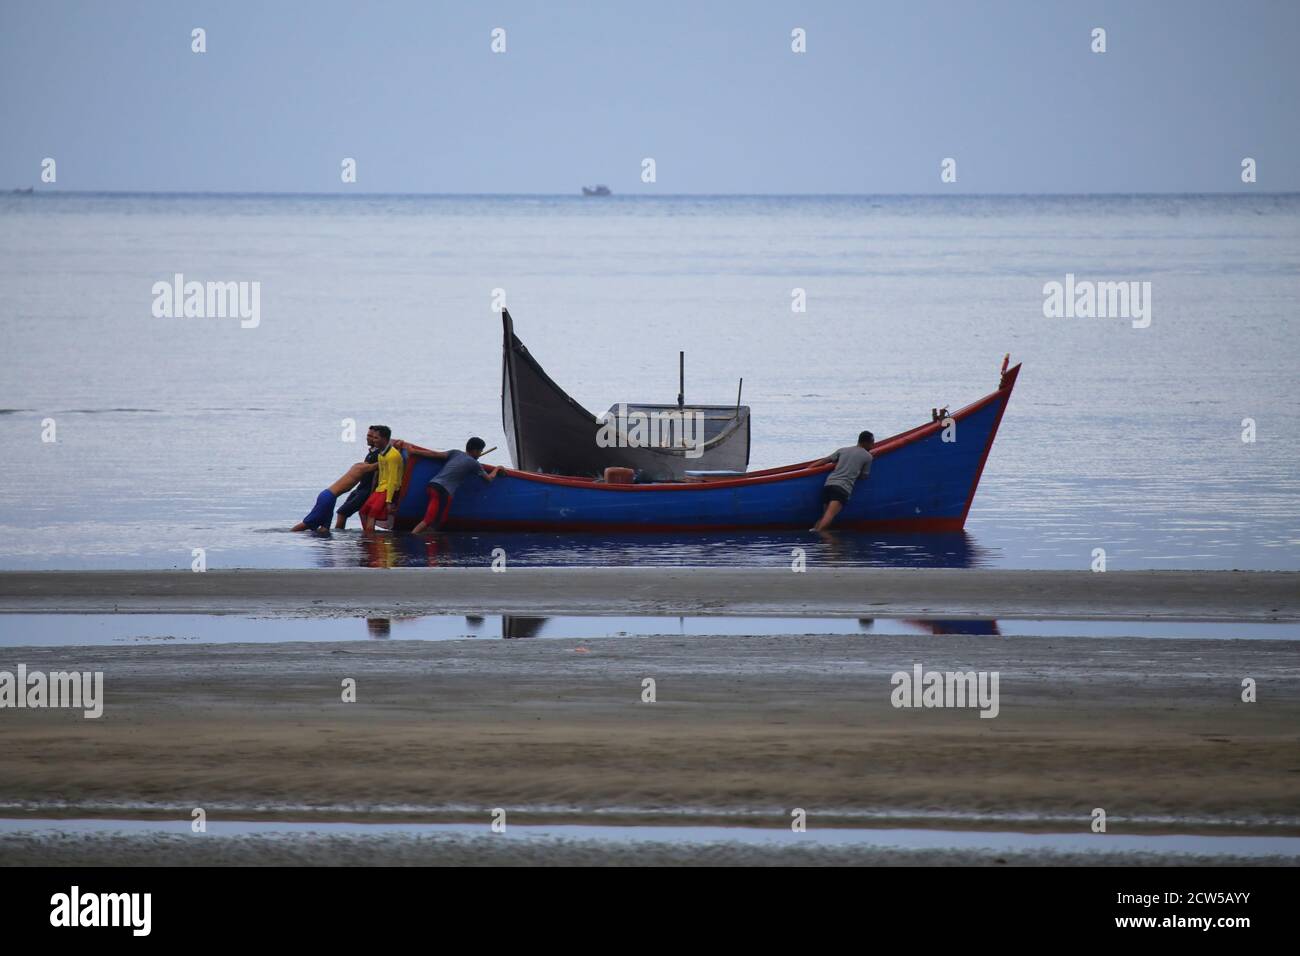 Residents of Banda Aceh, Indonesia, who live on the coast, are working to make a living on tidal beaches, during the COVID-19 pandemic Stock Photo